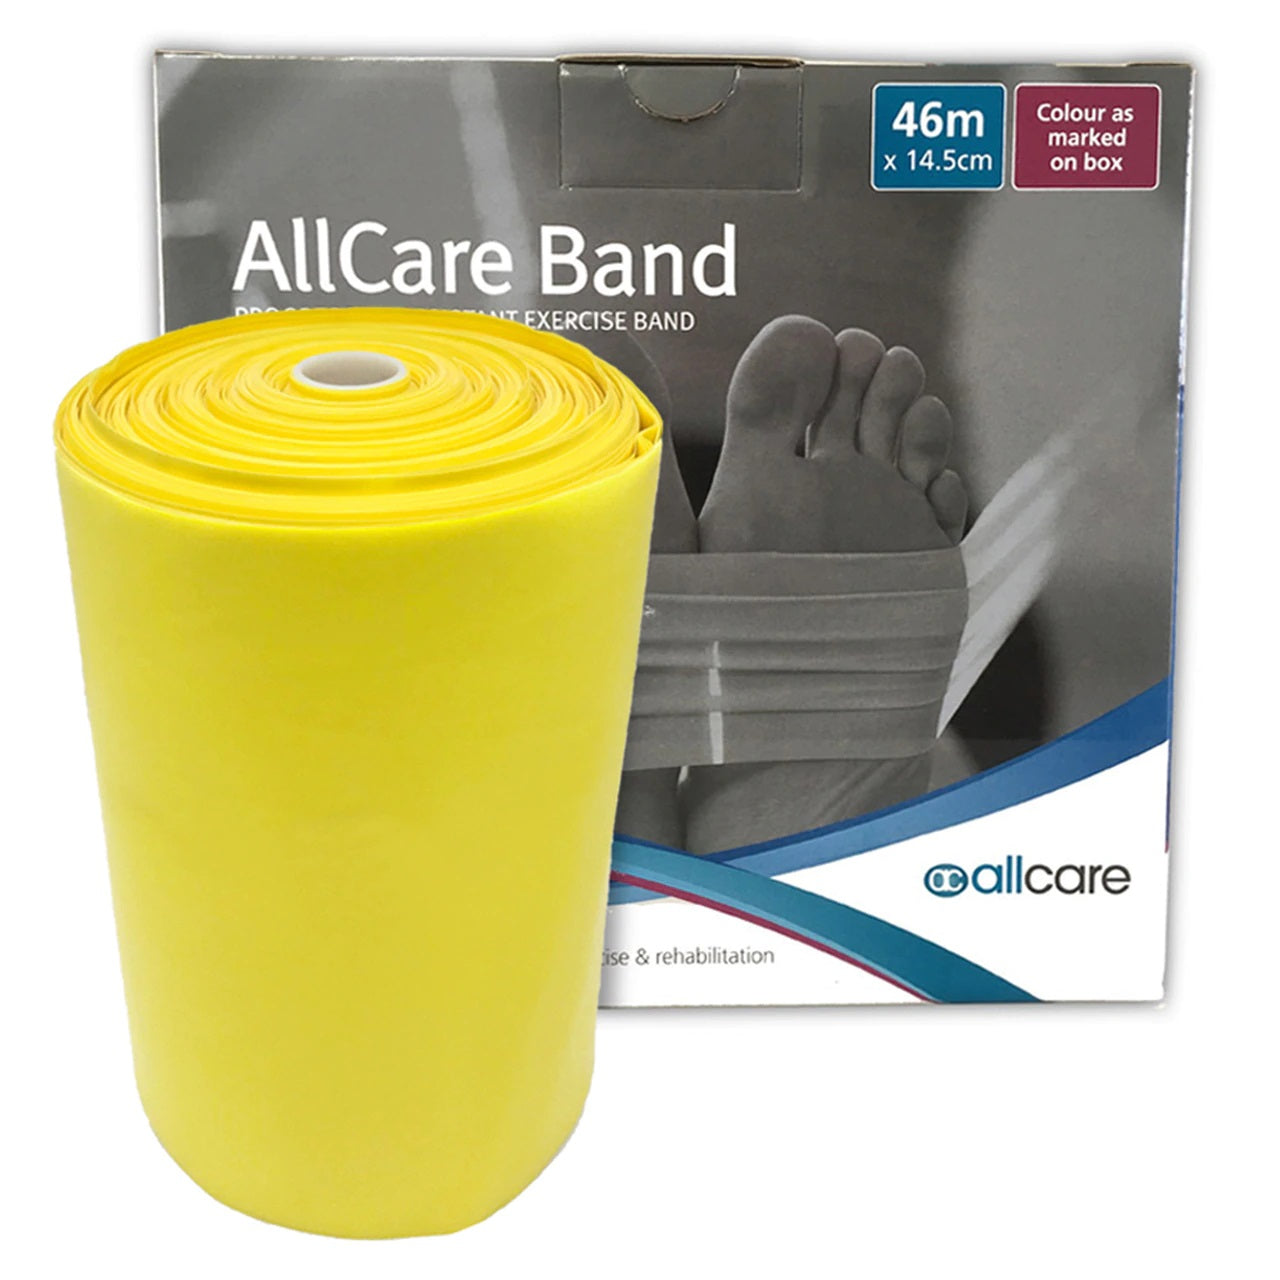 AllCare Latex Exercise Band - 46m